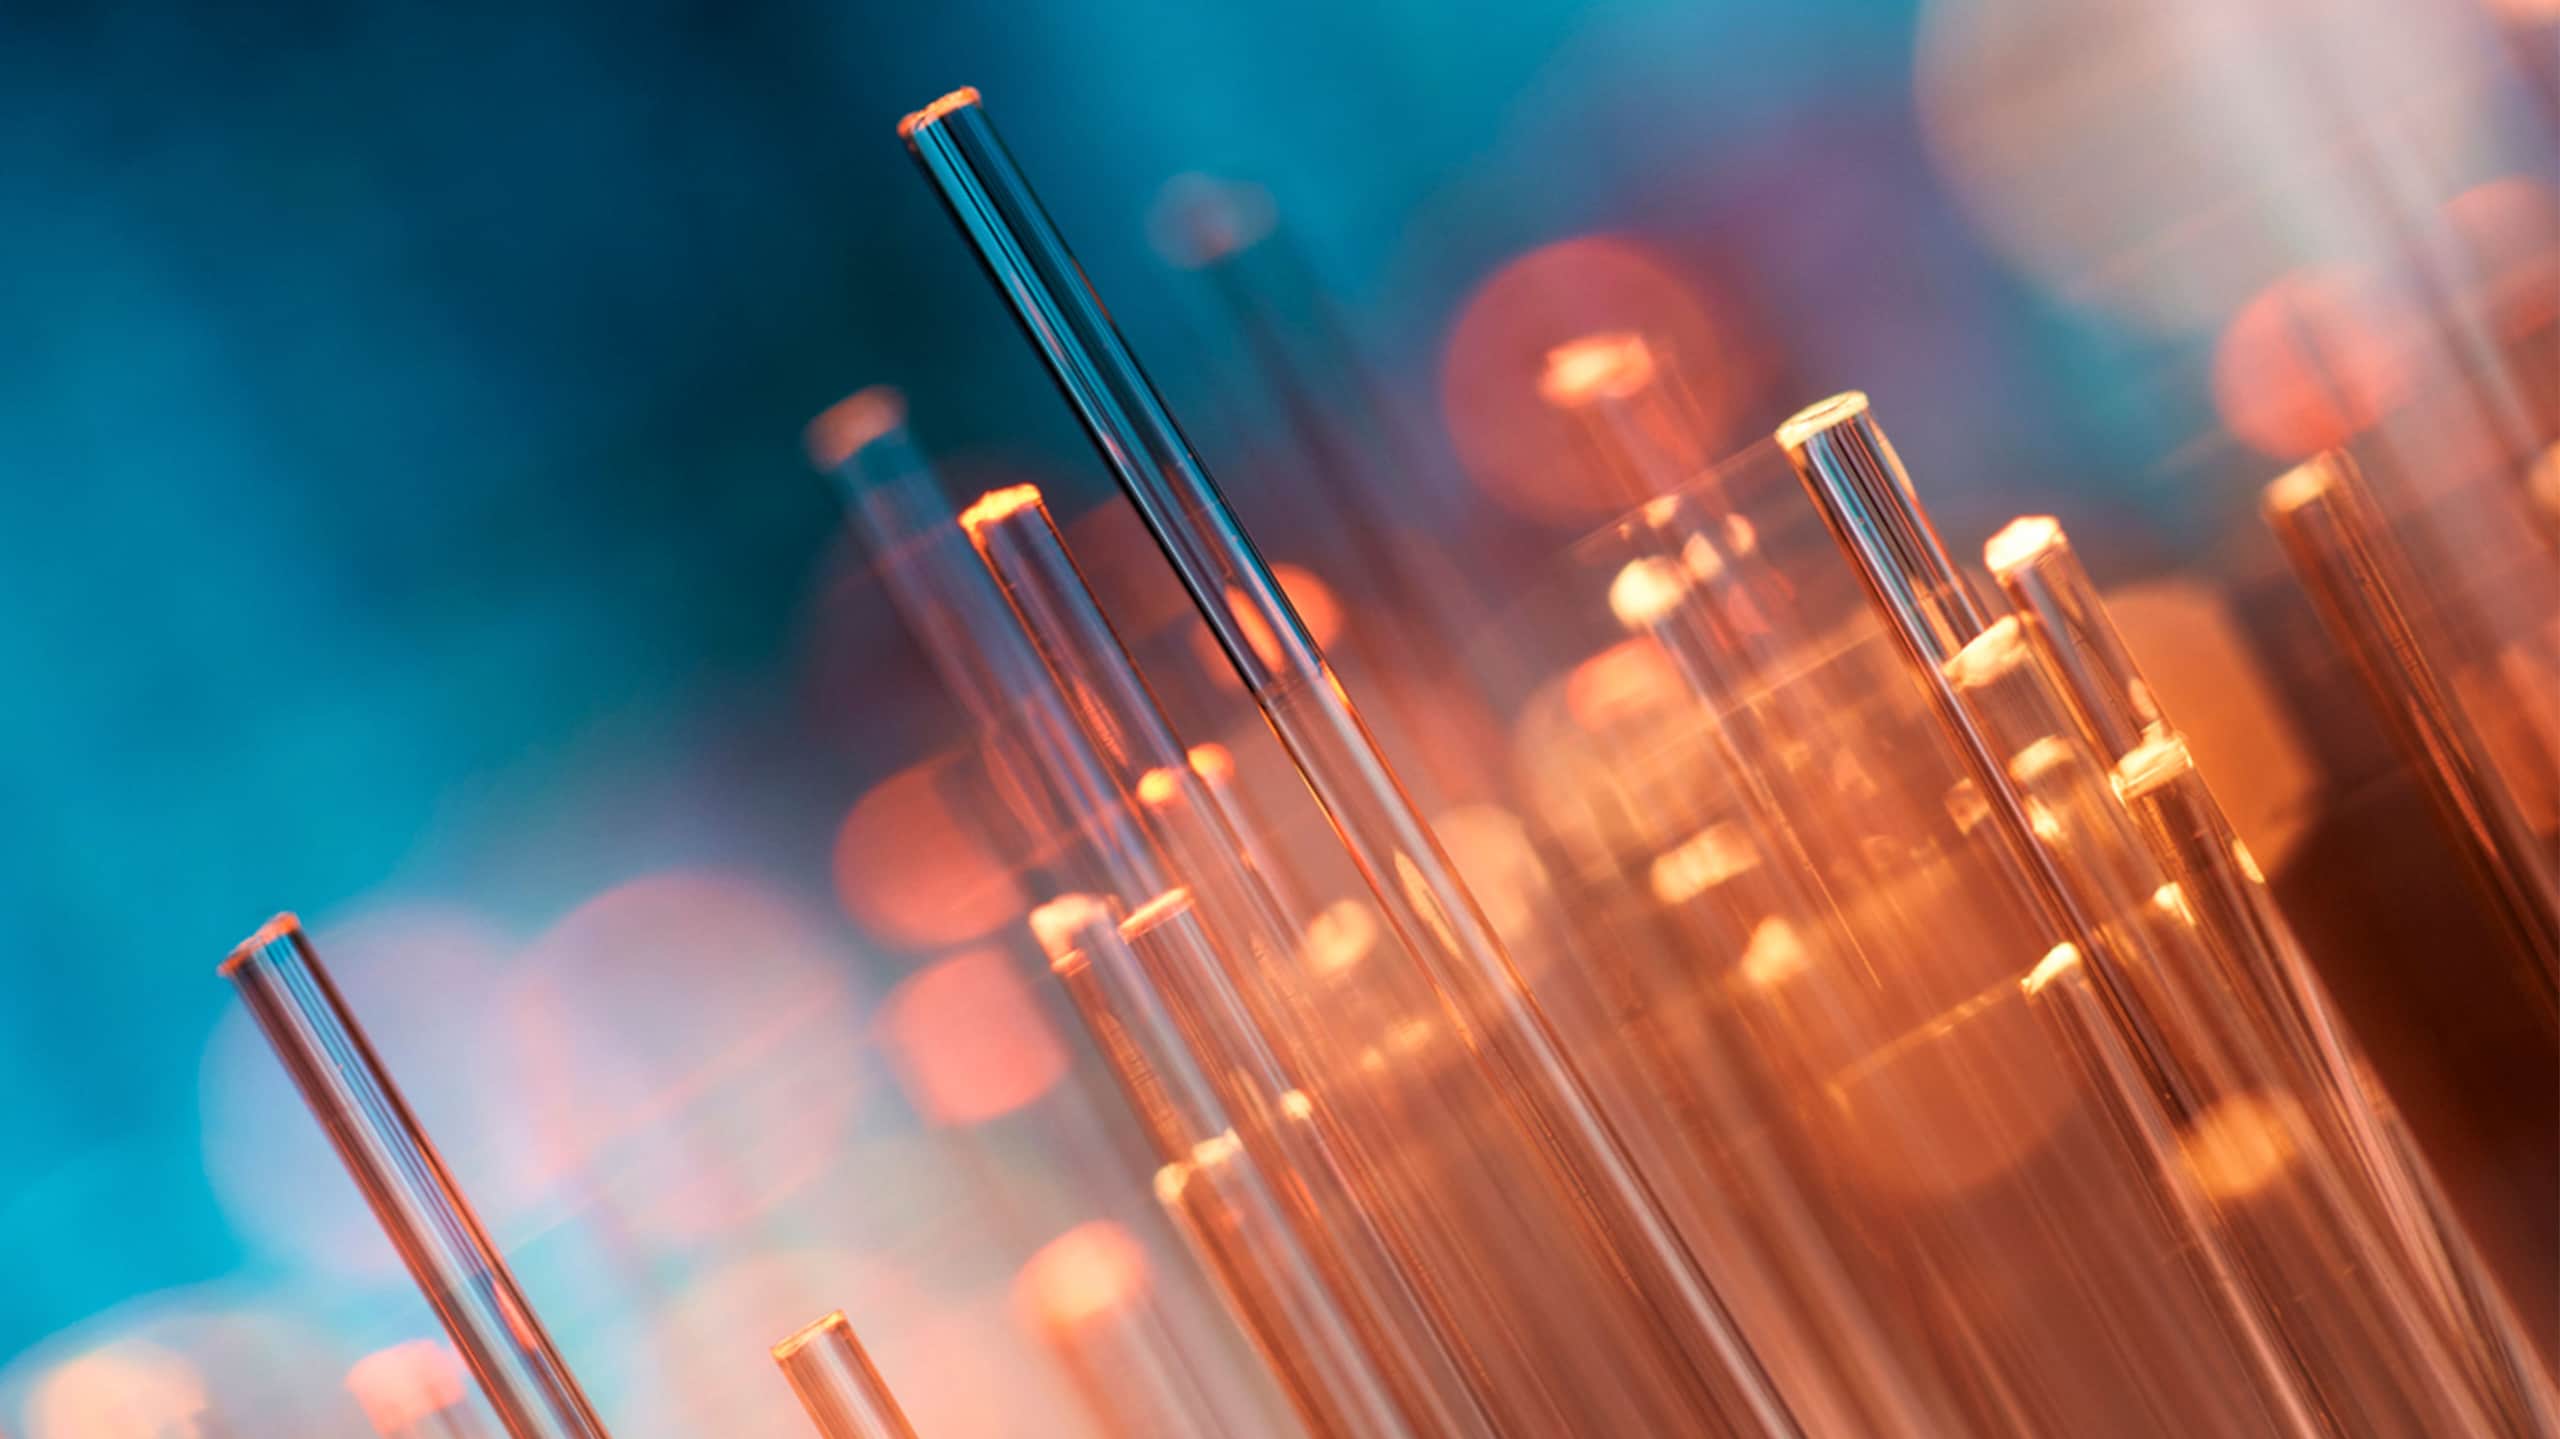 Close-up of optical fibers with illuminated tips against a blurry blue and orange background, showcasing a vibrant bokeh effect and finding new ASNs.